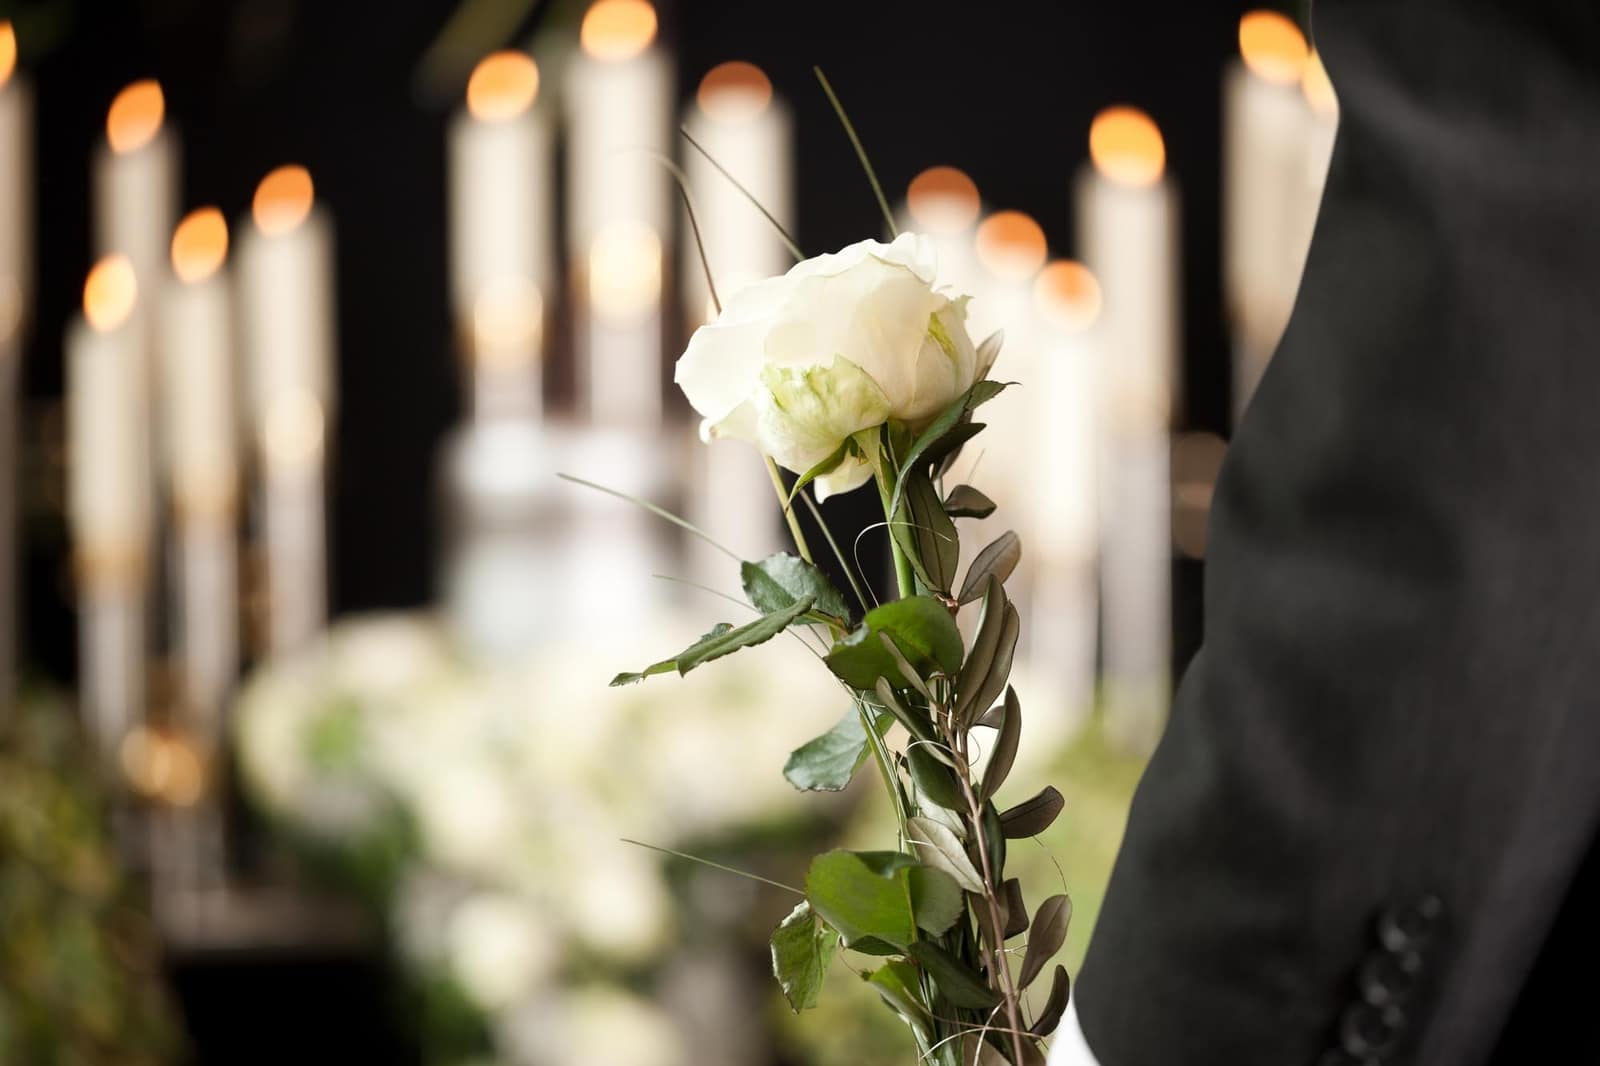 white rose being offered during a funeral service